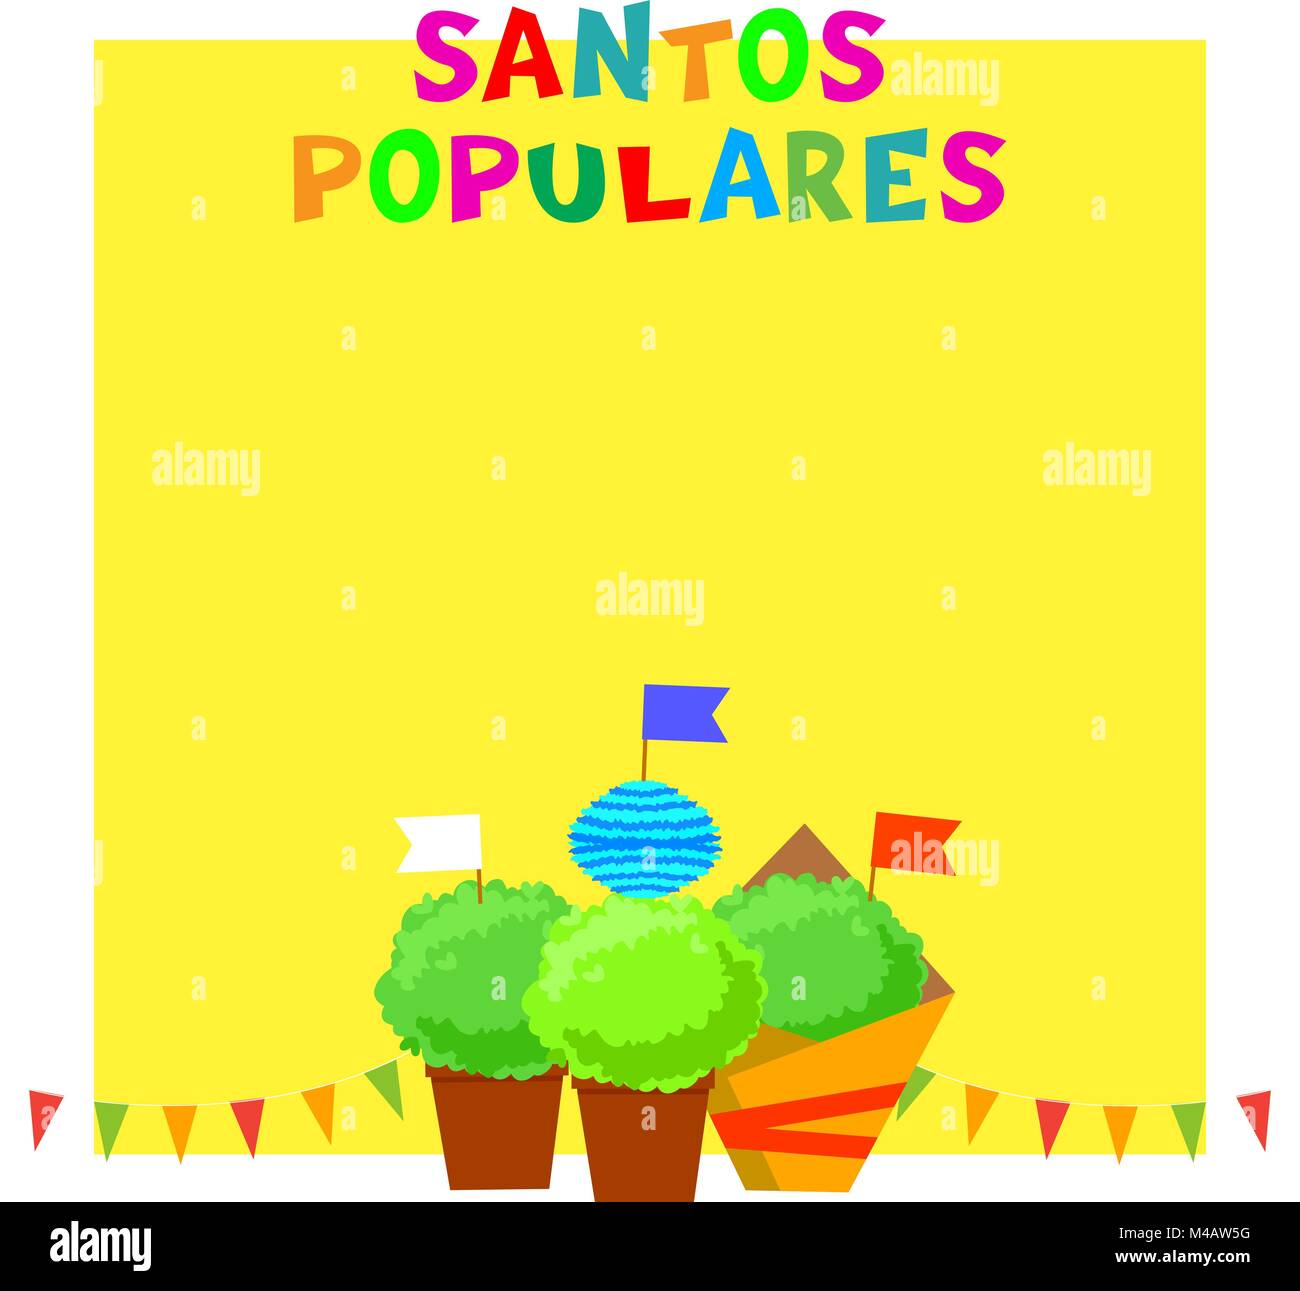 Santos Populares Portugues festival banner with bunting garlands, flags and manjerico plants. Stock Vector